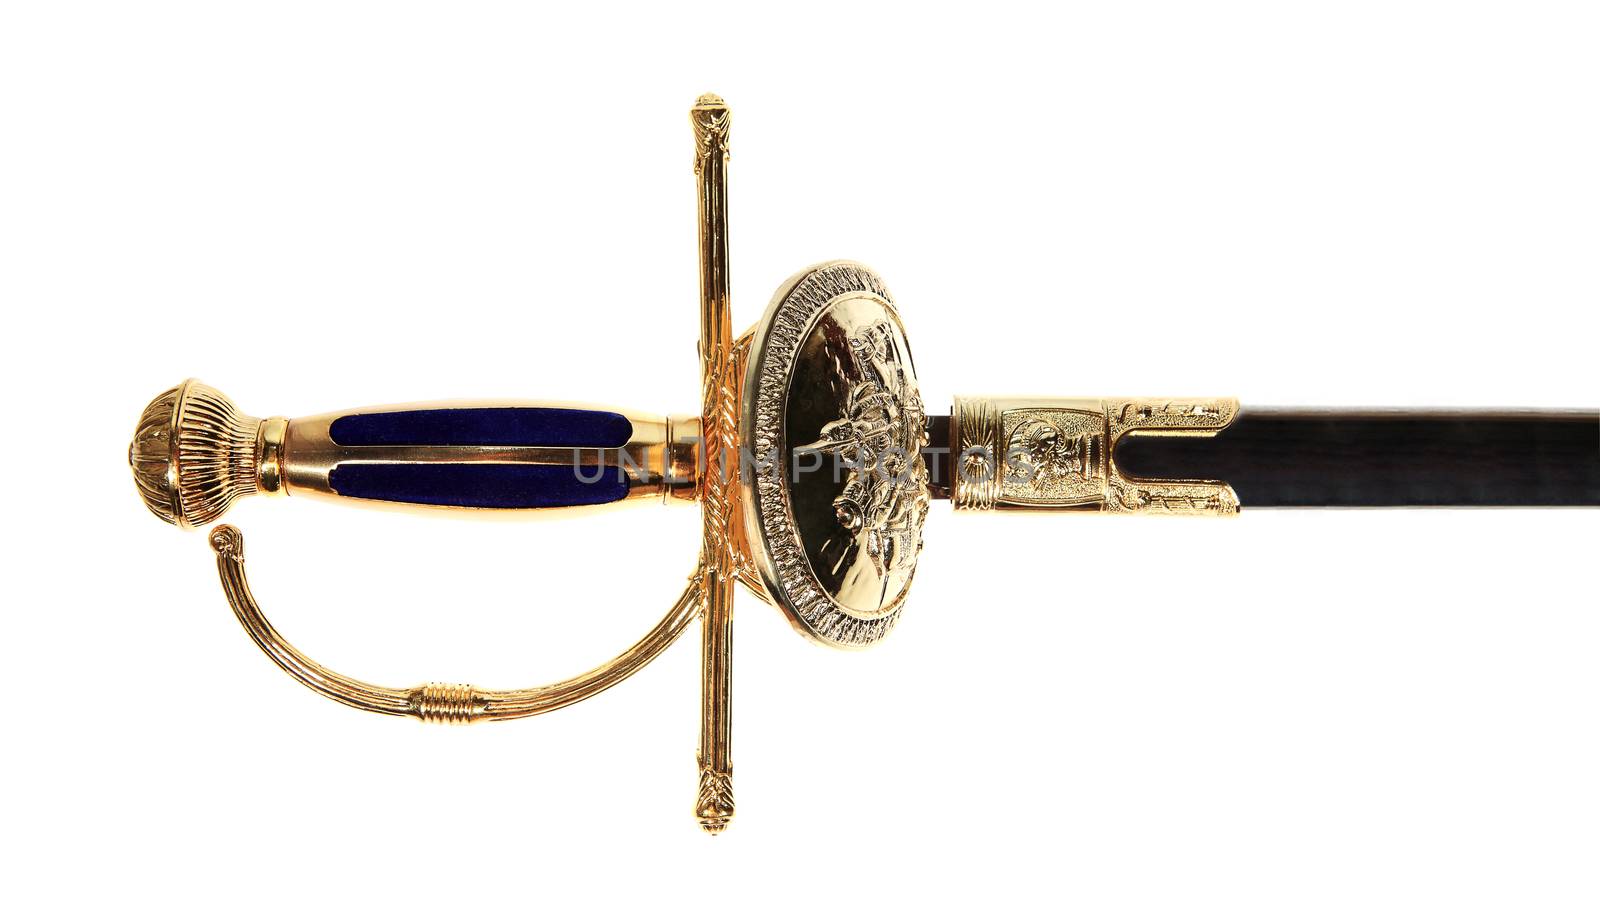 Handle of the sword on a white background.